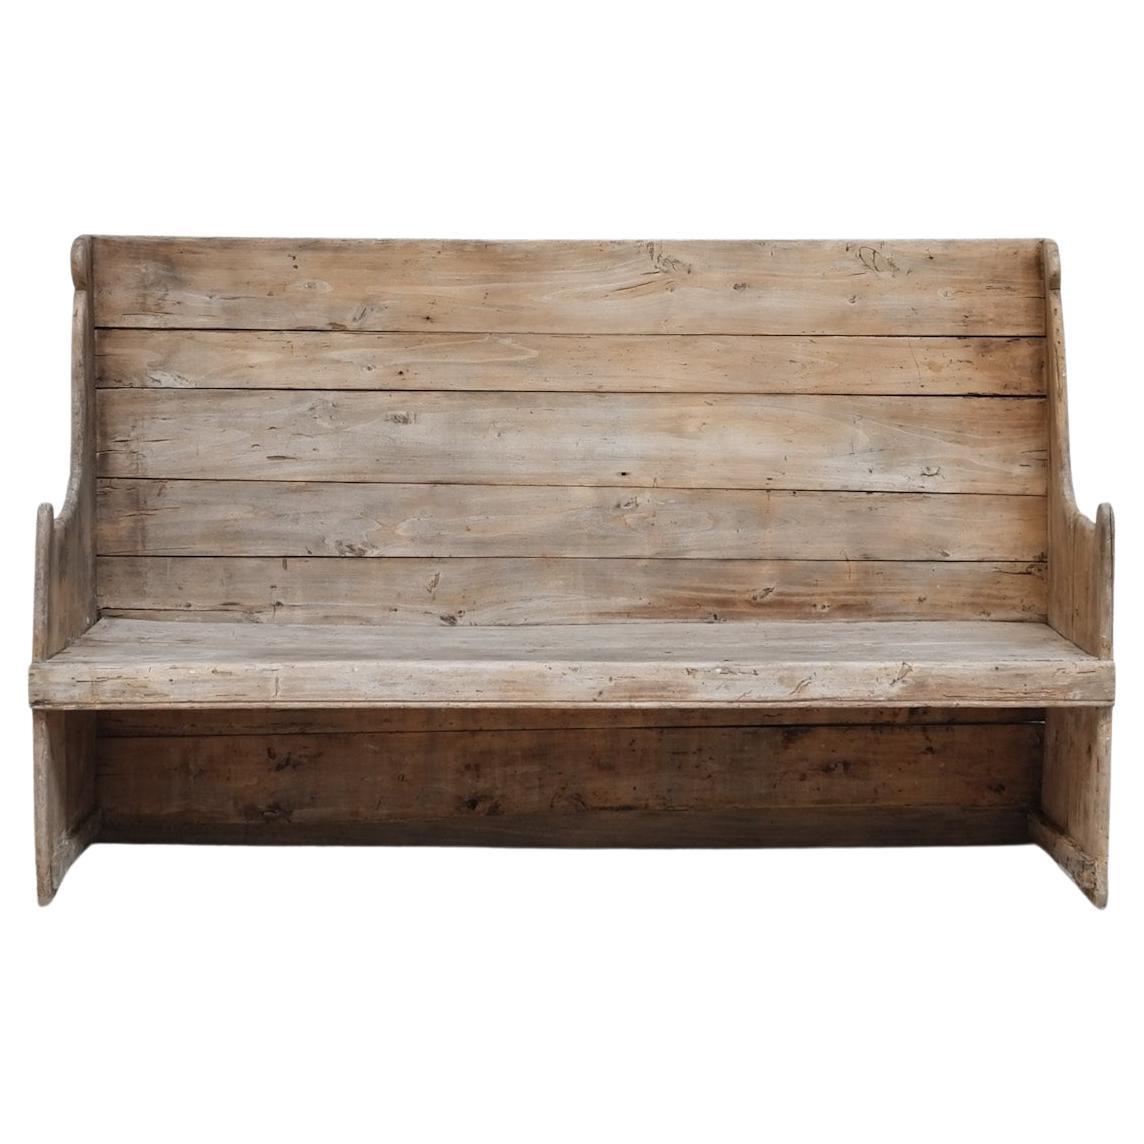 Large Bleached-Out Catalan Bench